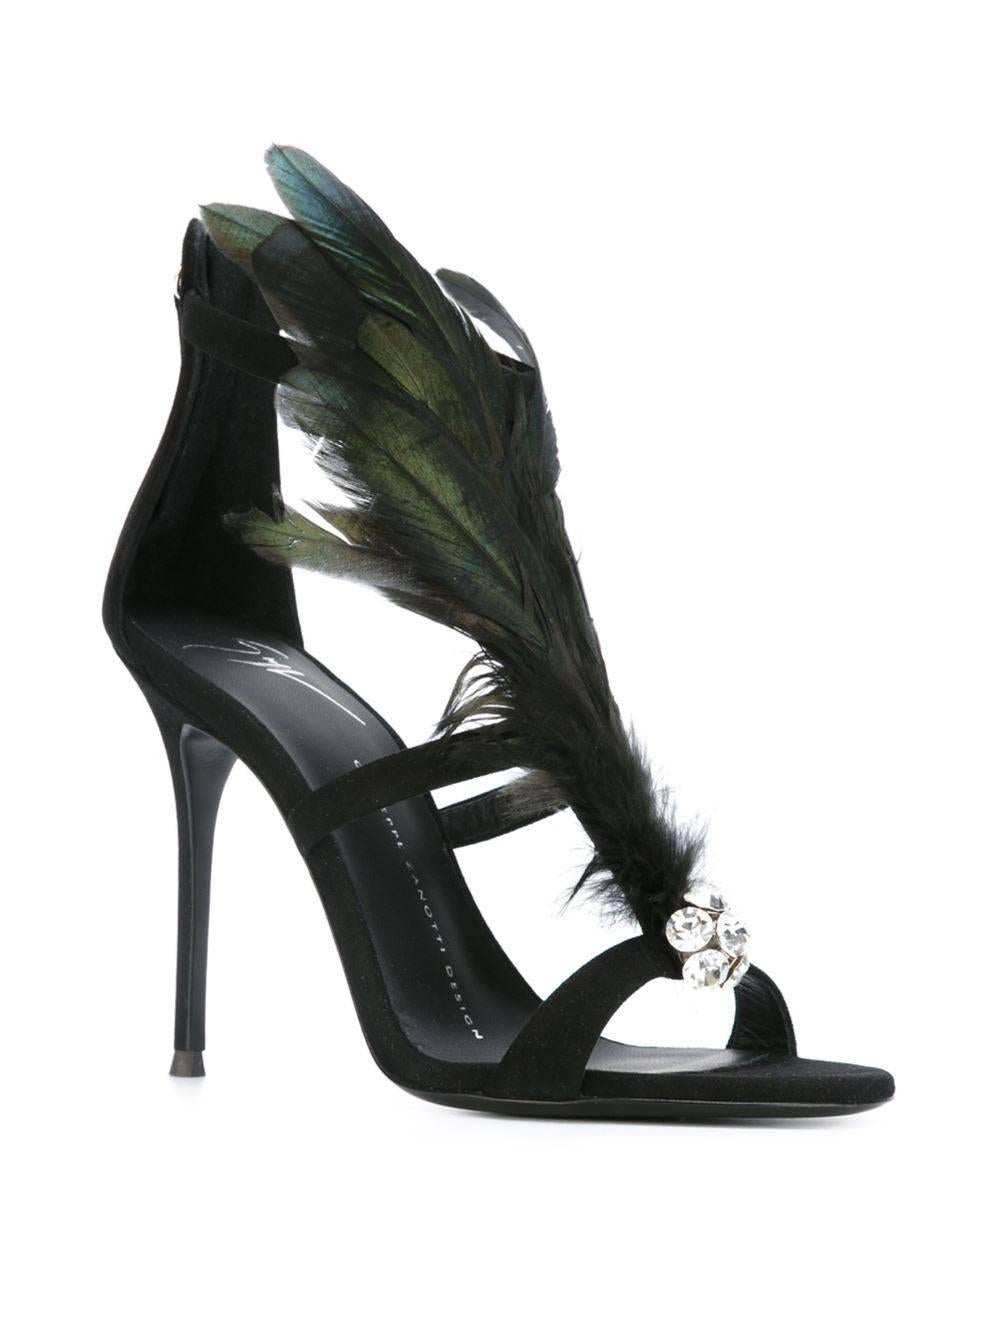 CURATOR'S NOTES

Giuseppe Zanotti NEW & SOLD OUT Black Peacock Evening Sandals Heels in Box 

Size IT 36
Suede
Crystal detail
Faux feather detail
Zipper closure
Made in Italy
Heel height 4"
Includes original Giuseppe Zanotti box